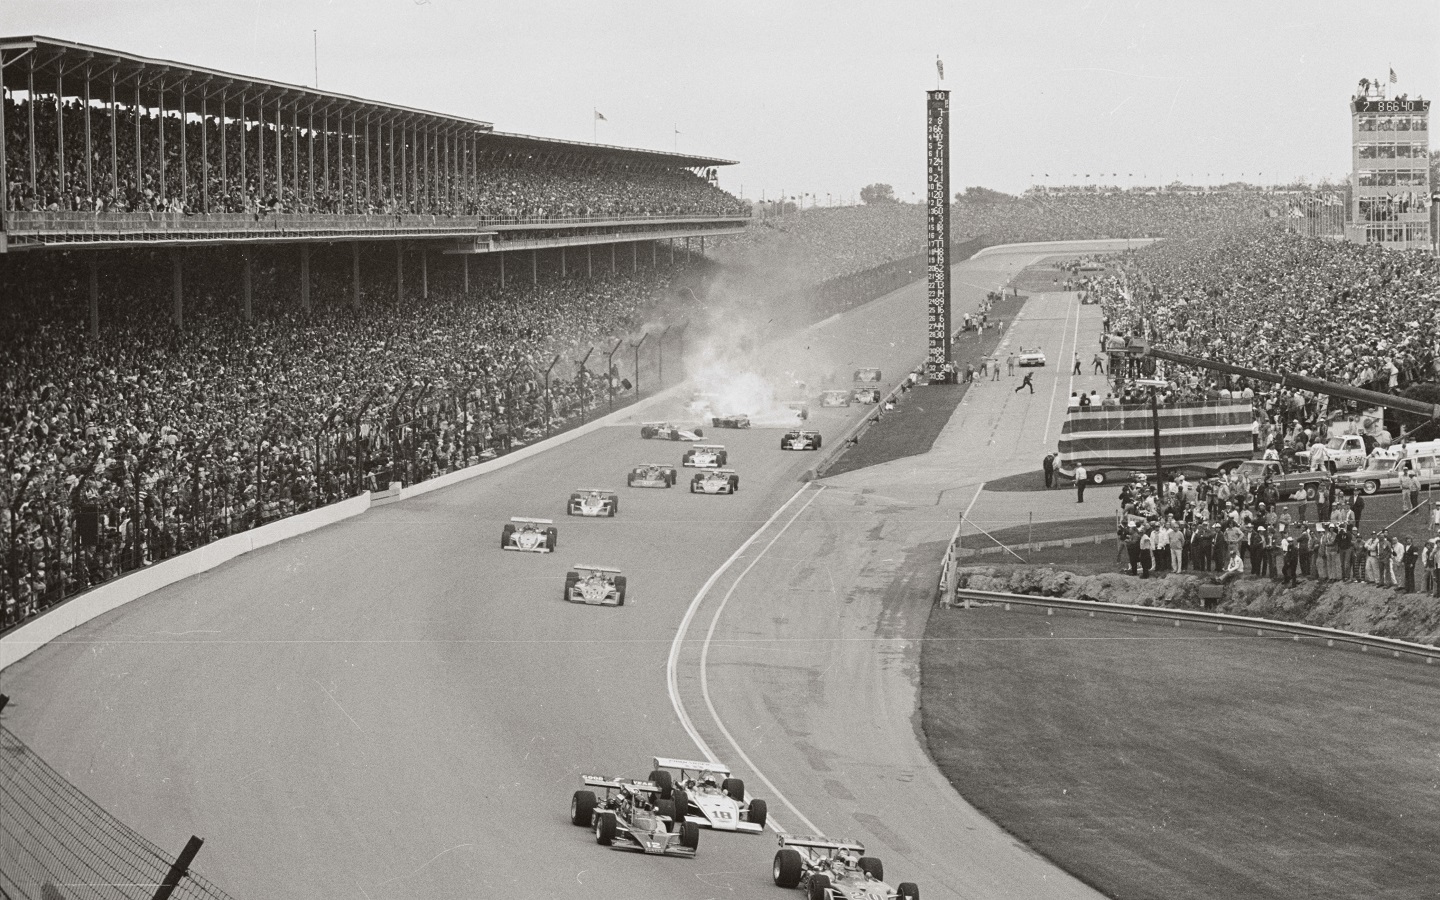 Huge ball of fire covers the track as the car of Salt Walther spins across the main stretch after hitting the outside wall just as the field of 32 cars began the first lap of the Indy 500